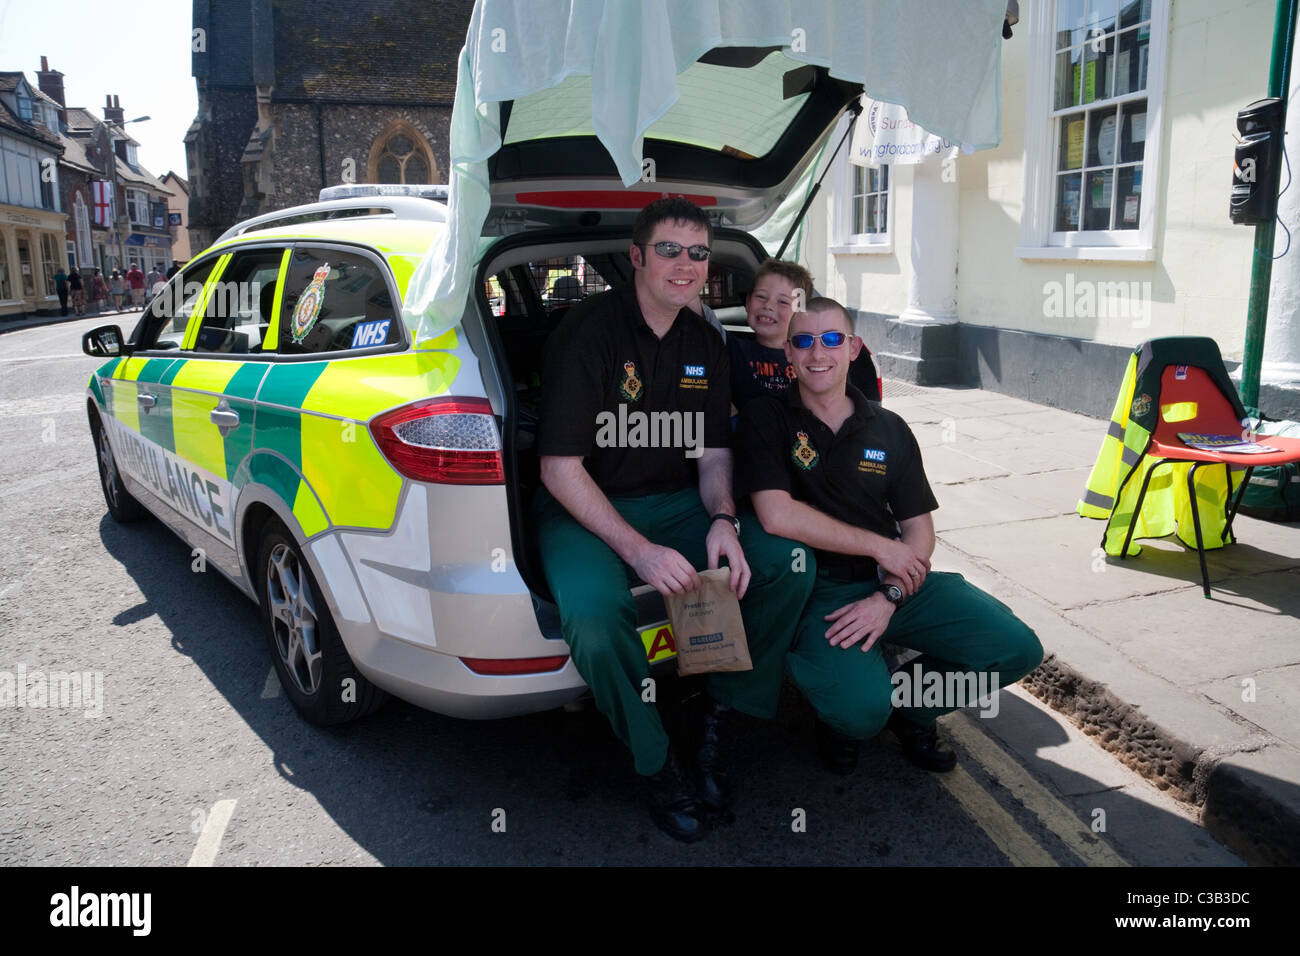 Paramedics in their car on duty at the town fair, Wallingford, Oxfordshire UK Stock Photo